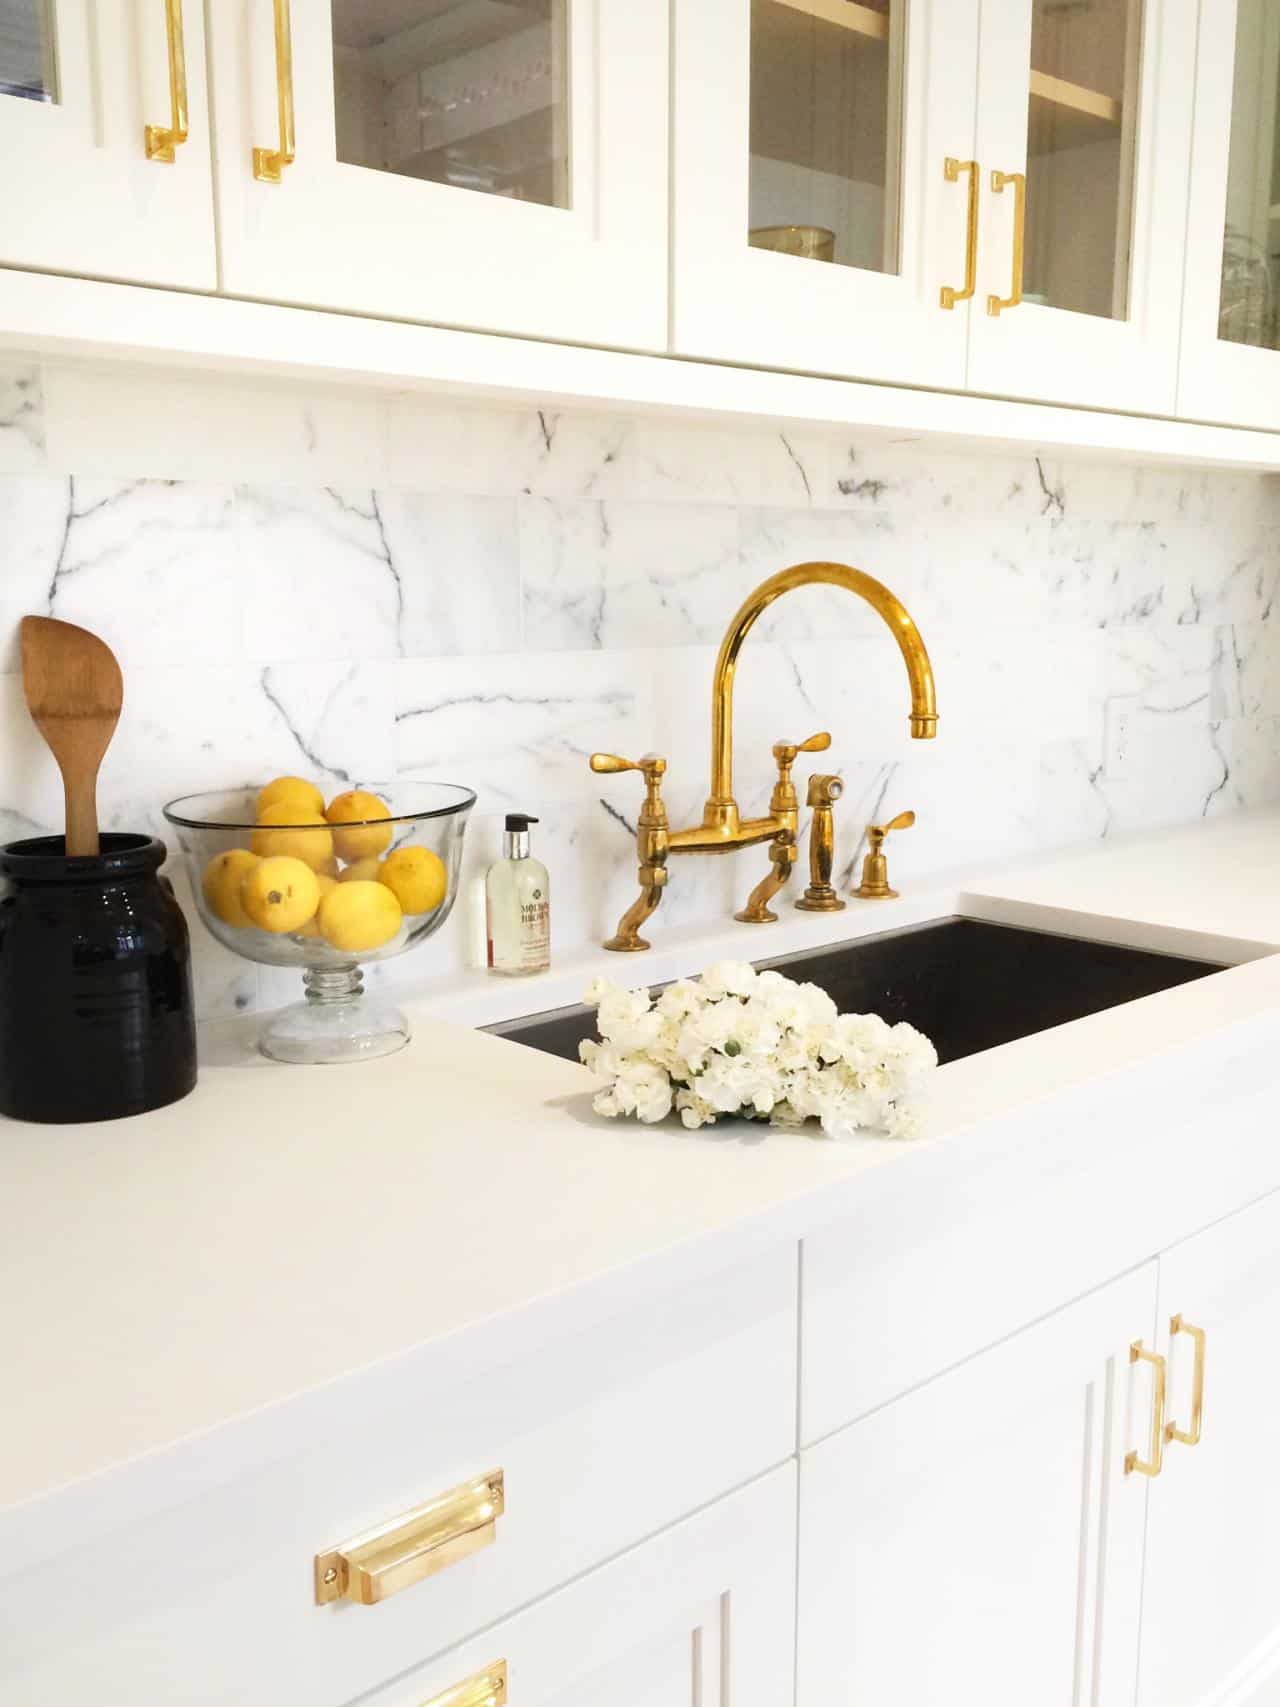 There is a special place in interior decorating for marble. Marble just seems to work well in every area of a home